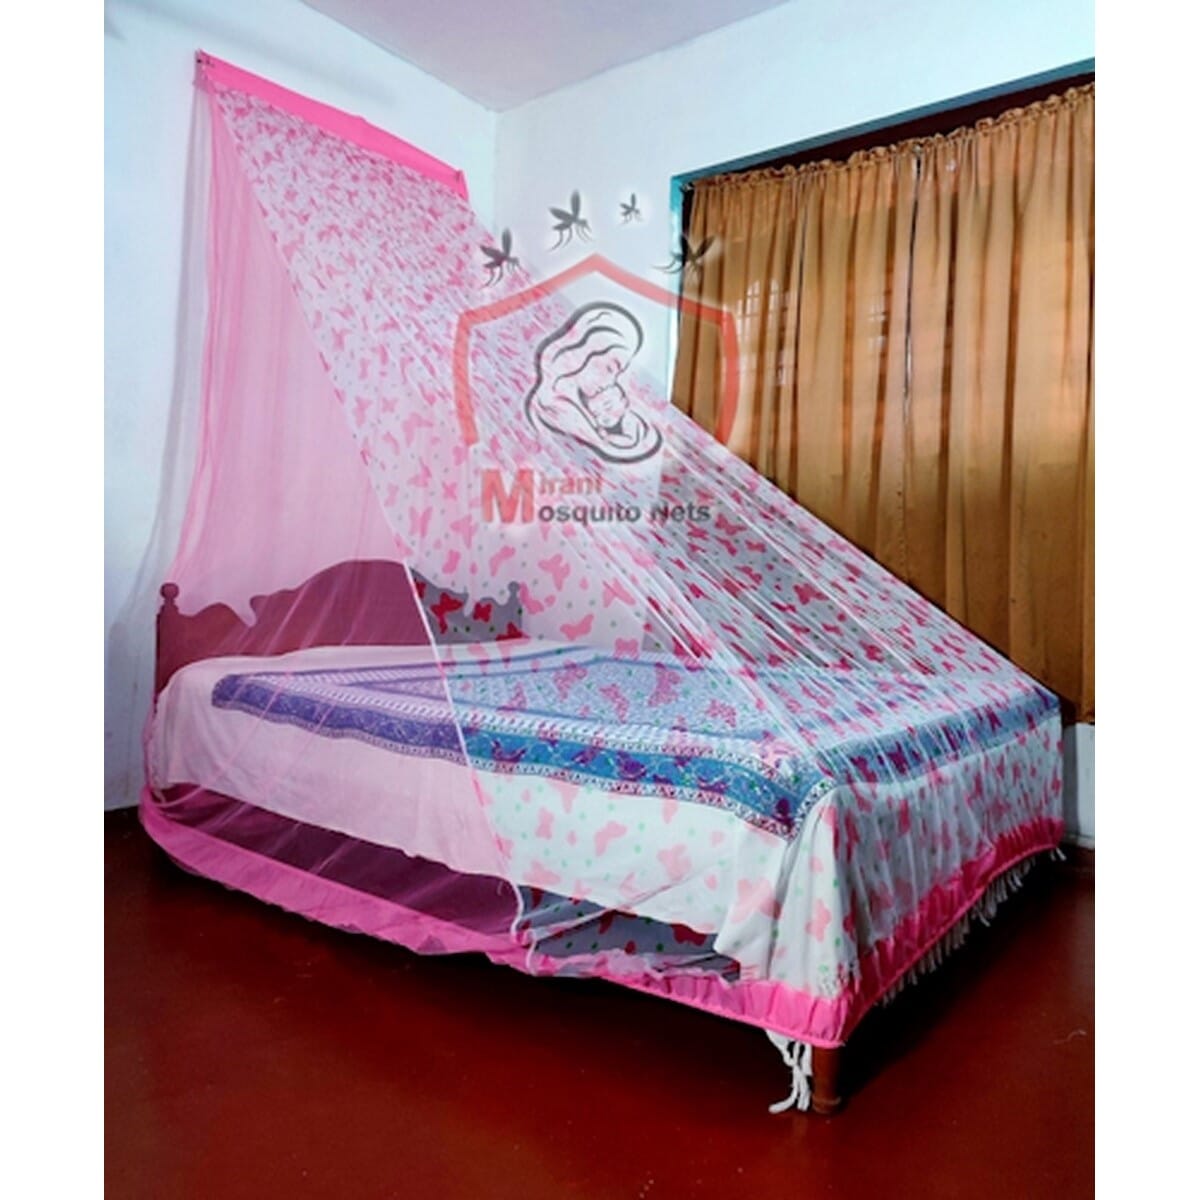 High Quality And Comfortable Wall Mosquito Nets 6' x 6